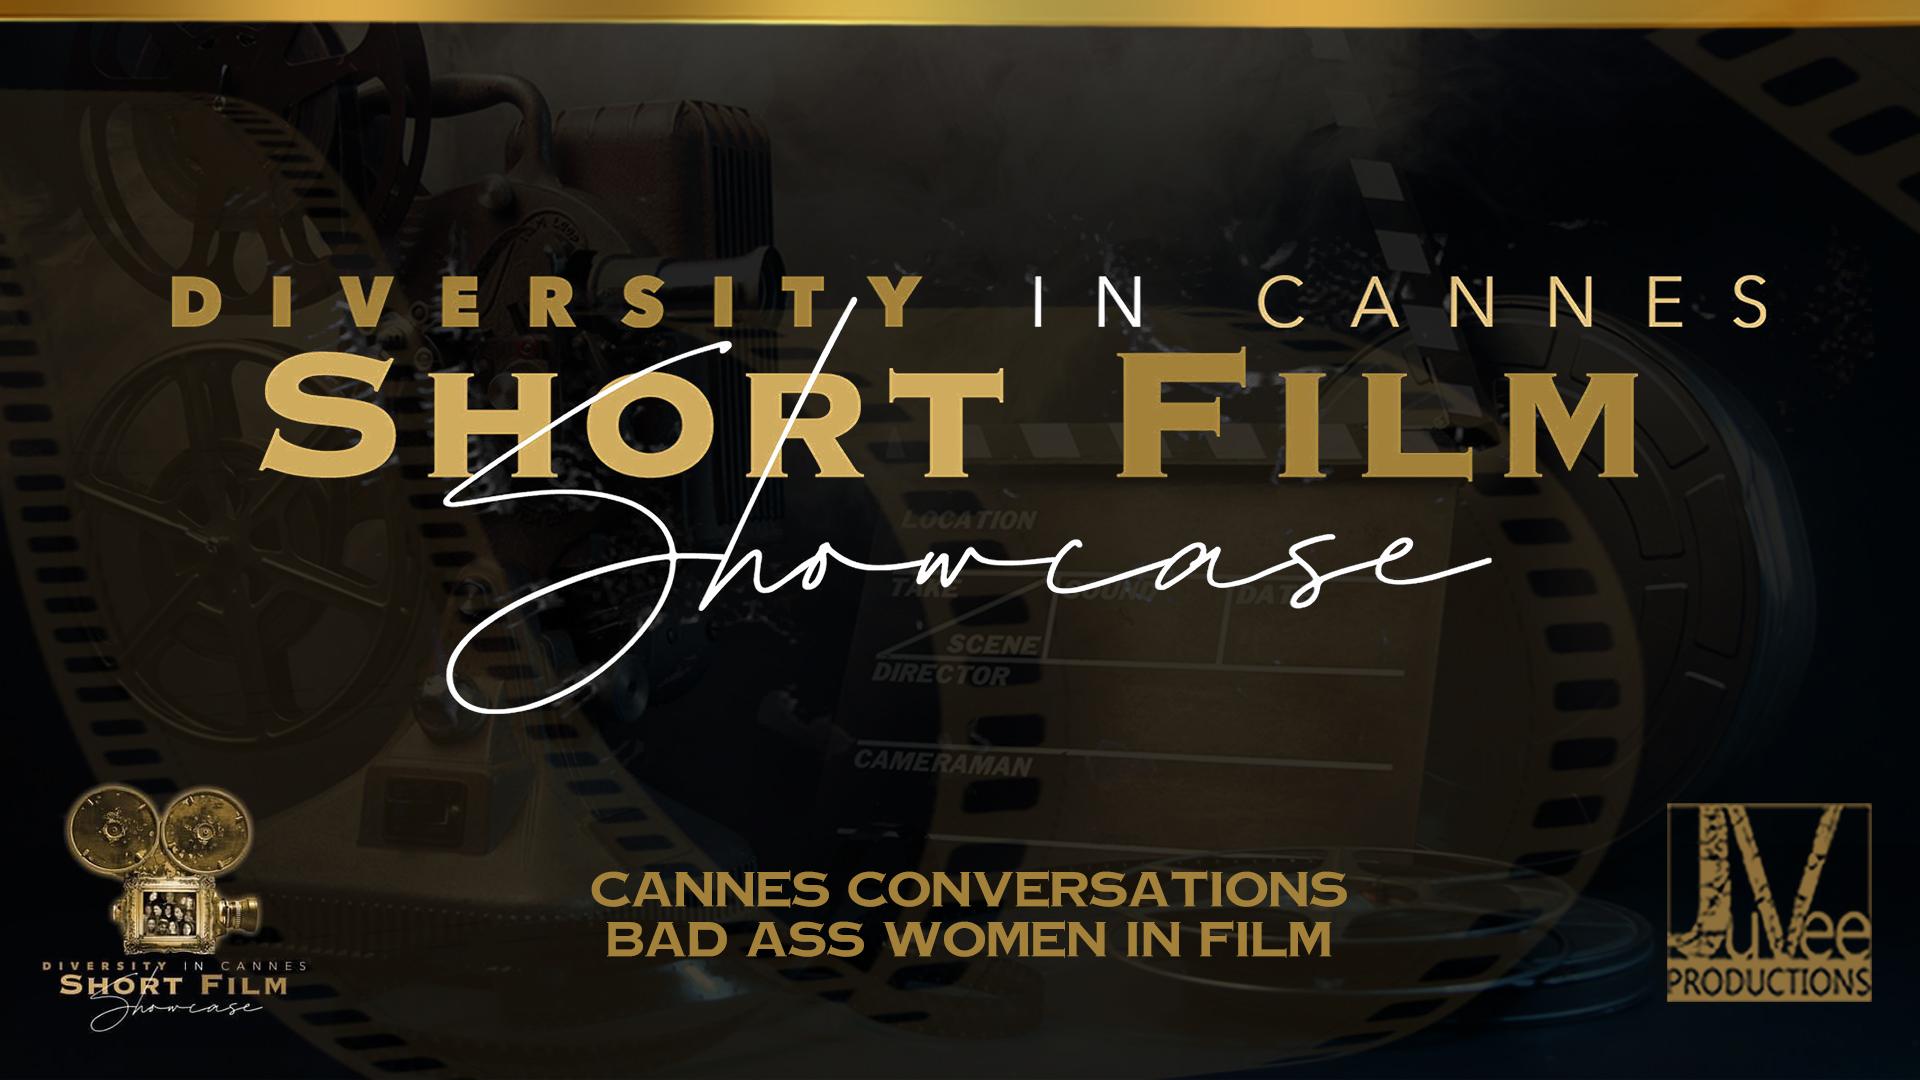 CANNES CONVERSATIONS BAD ASS WOMEN IN FILM